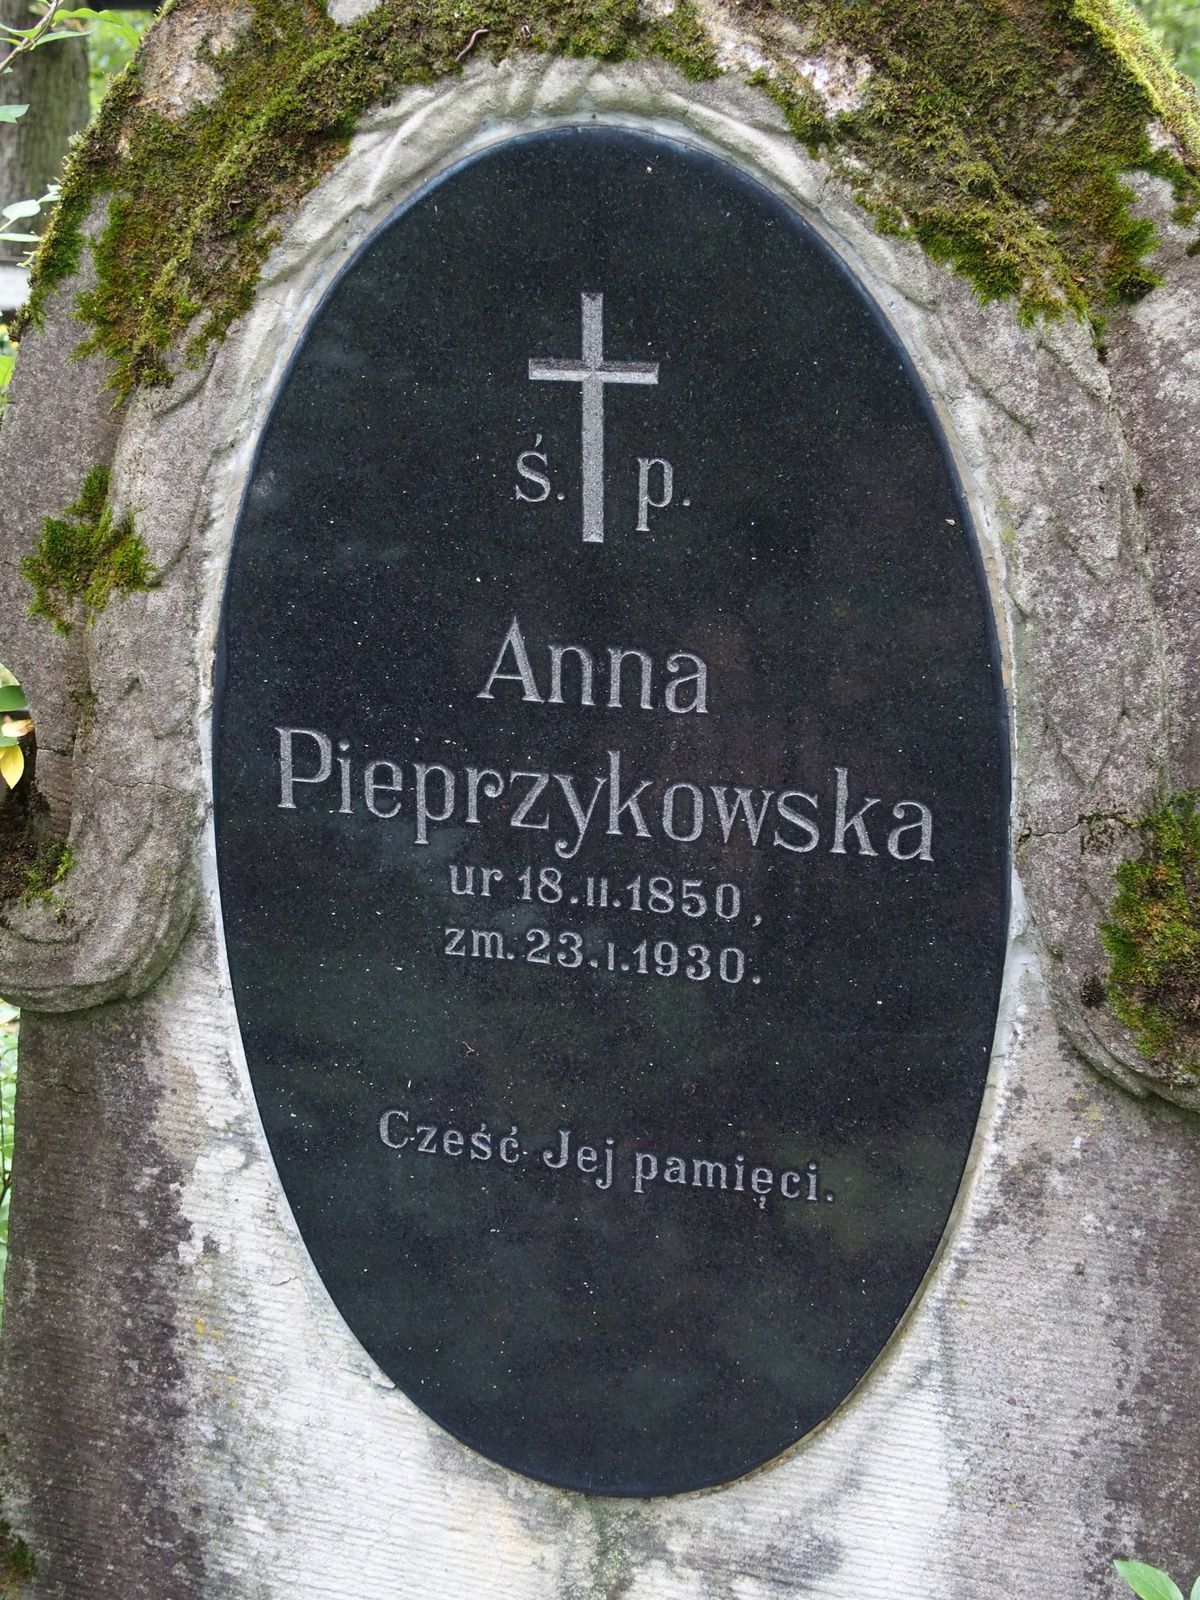 Inscription from the gravestone of Anna Pieprzykowska, St Michael's cemetery in Riga, as of 2021.